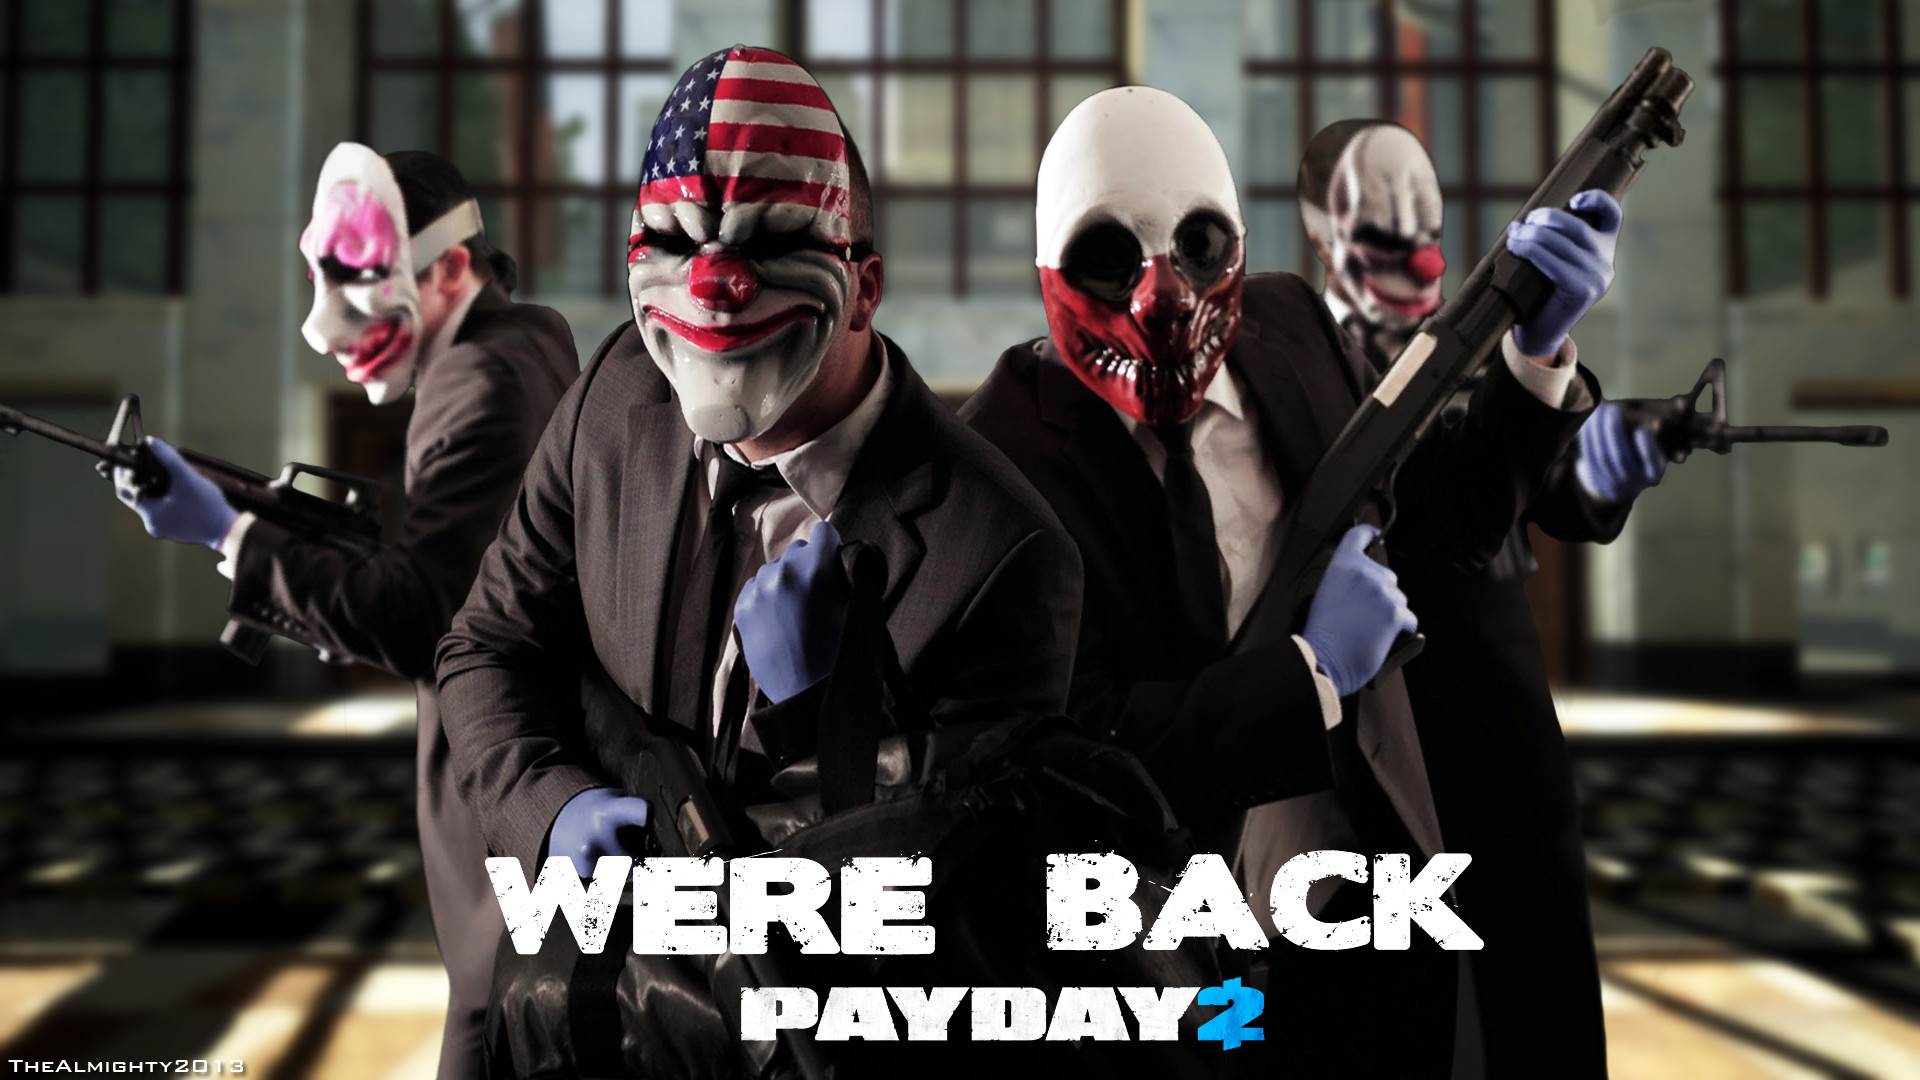 payday 2 wallpapers « GamingBolt.com: Video Game News, Reviews ...